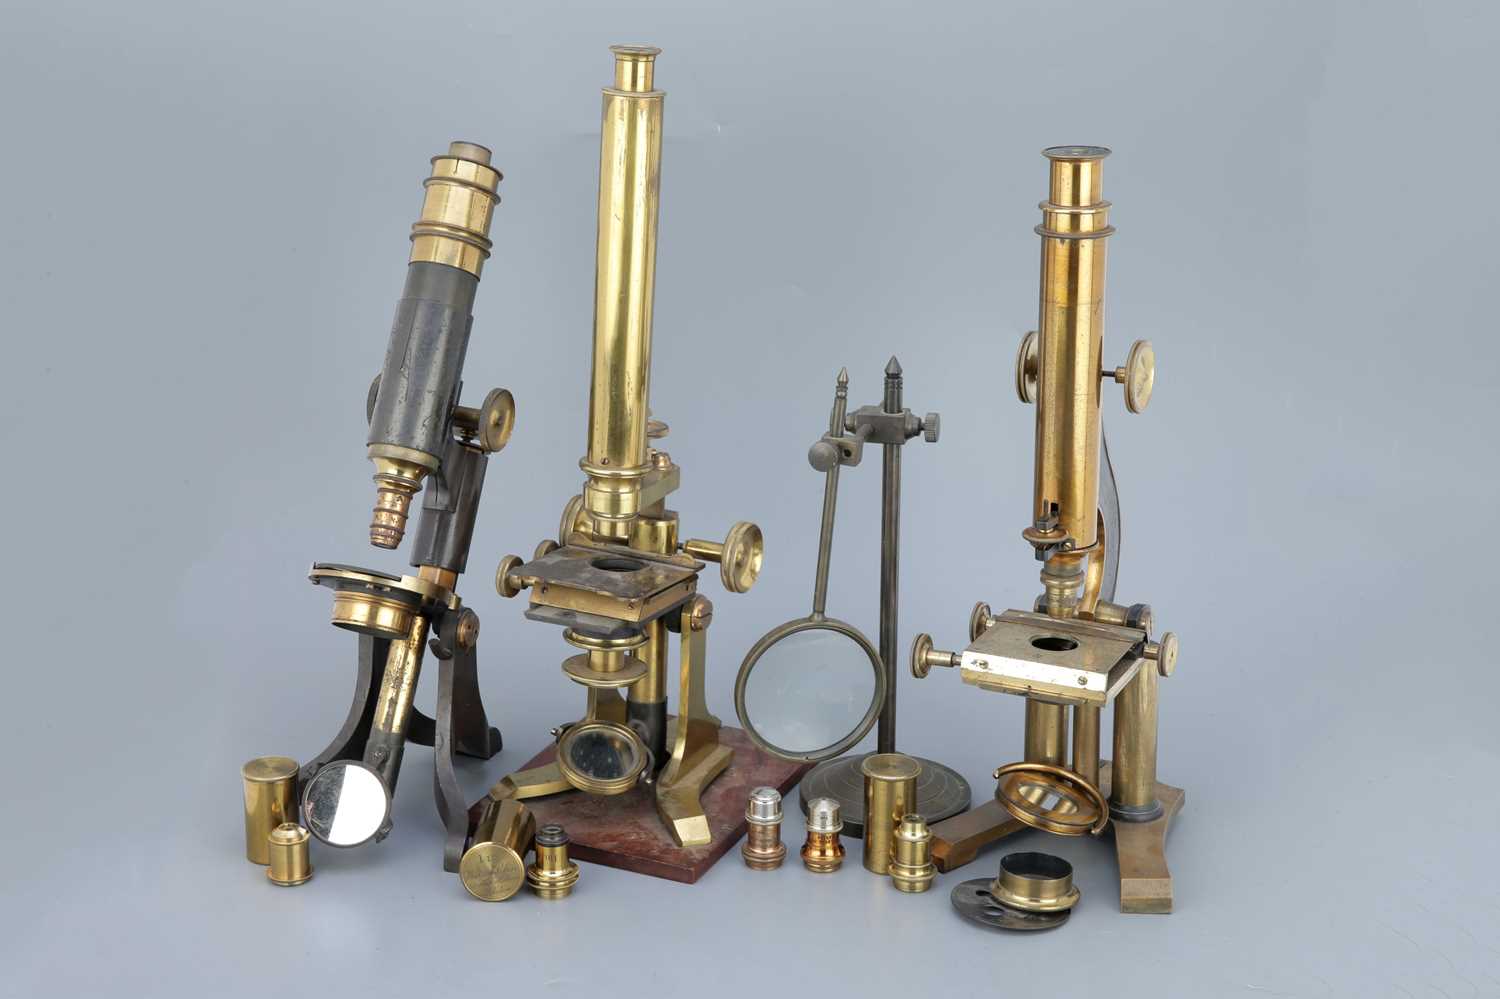 Lot 30 - Collection of 3 Brass Microscope & Accessories